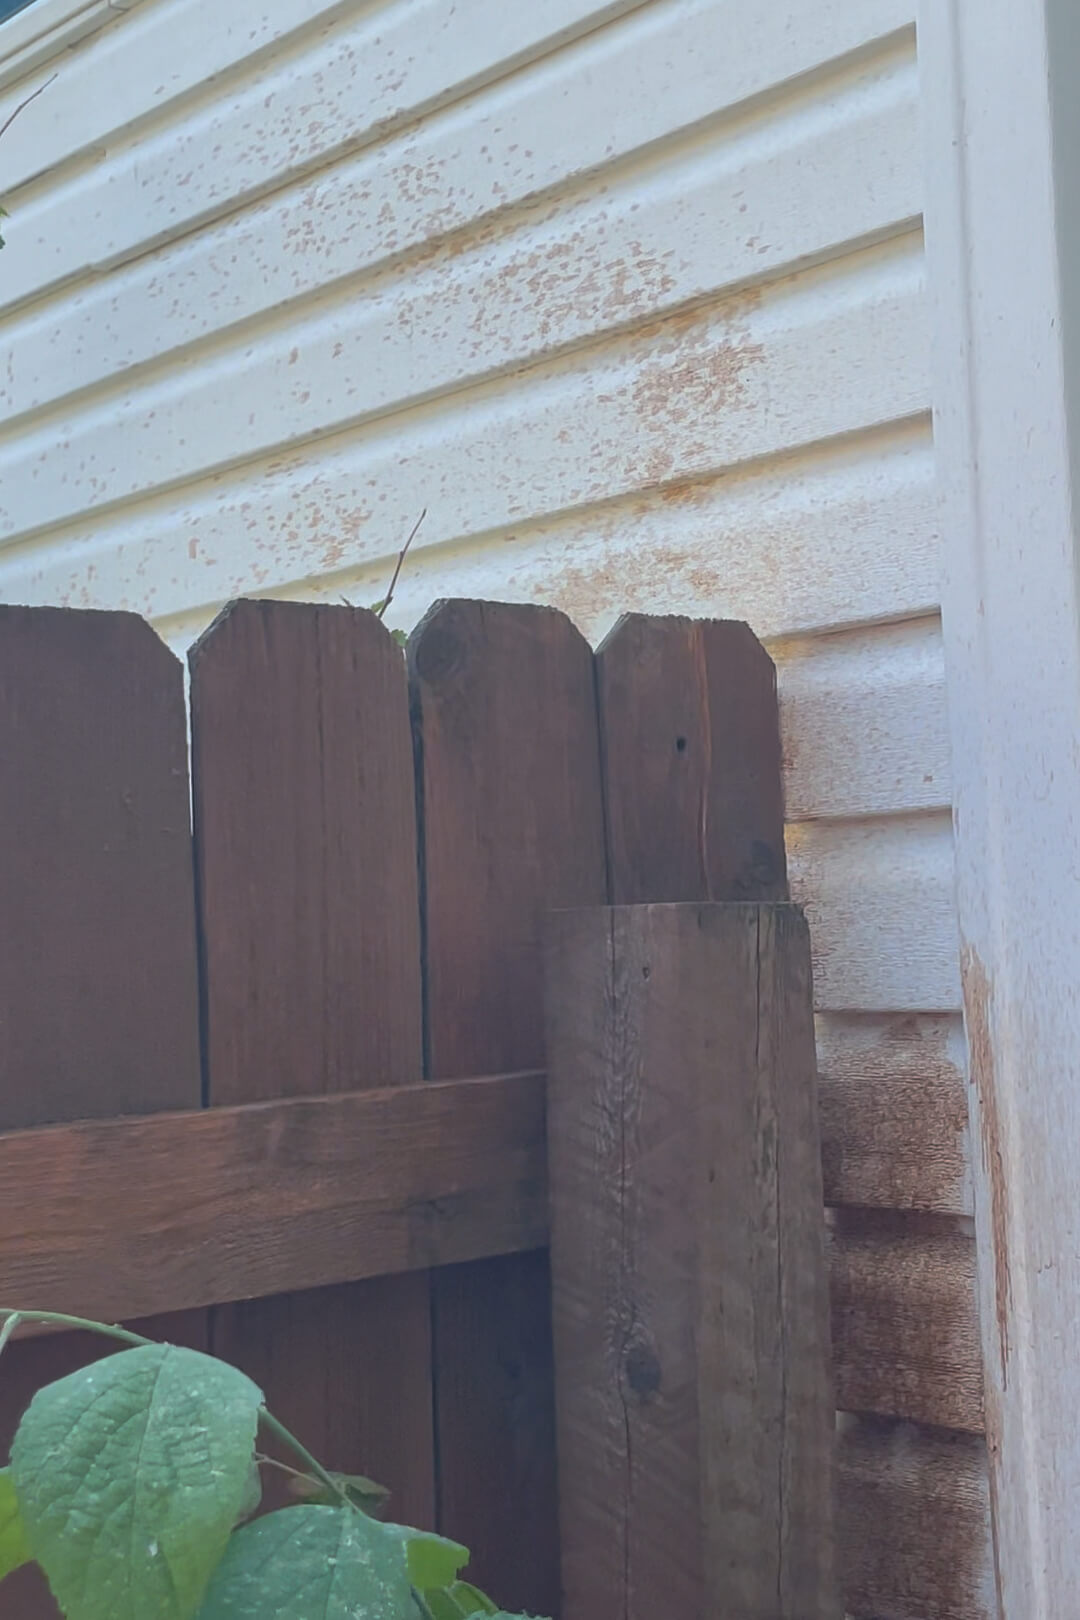 Overspray on the house from staining a wood fence.